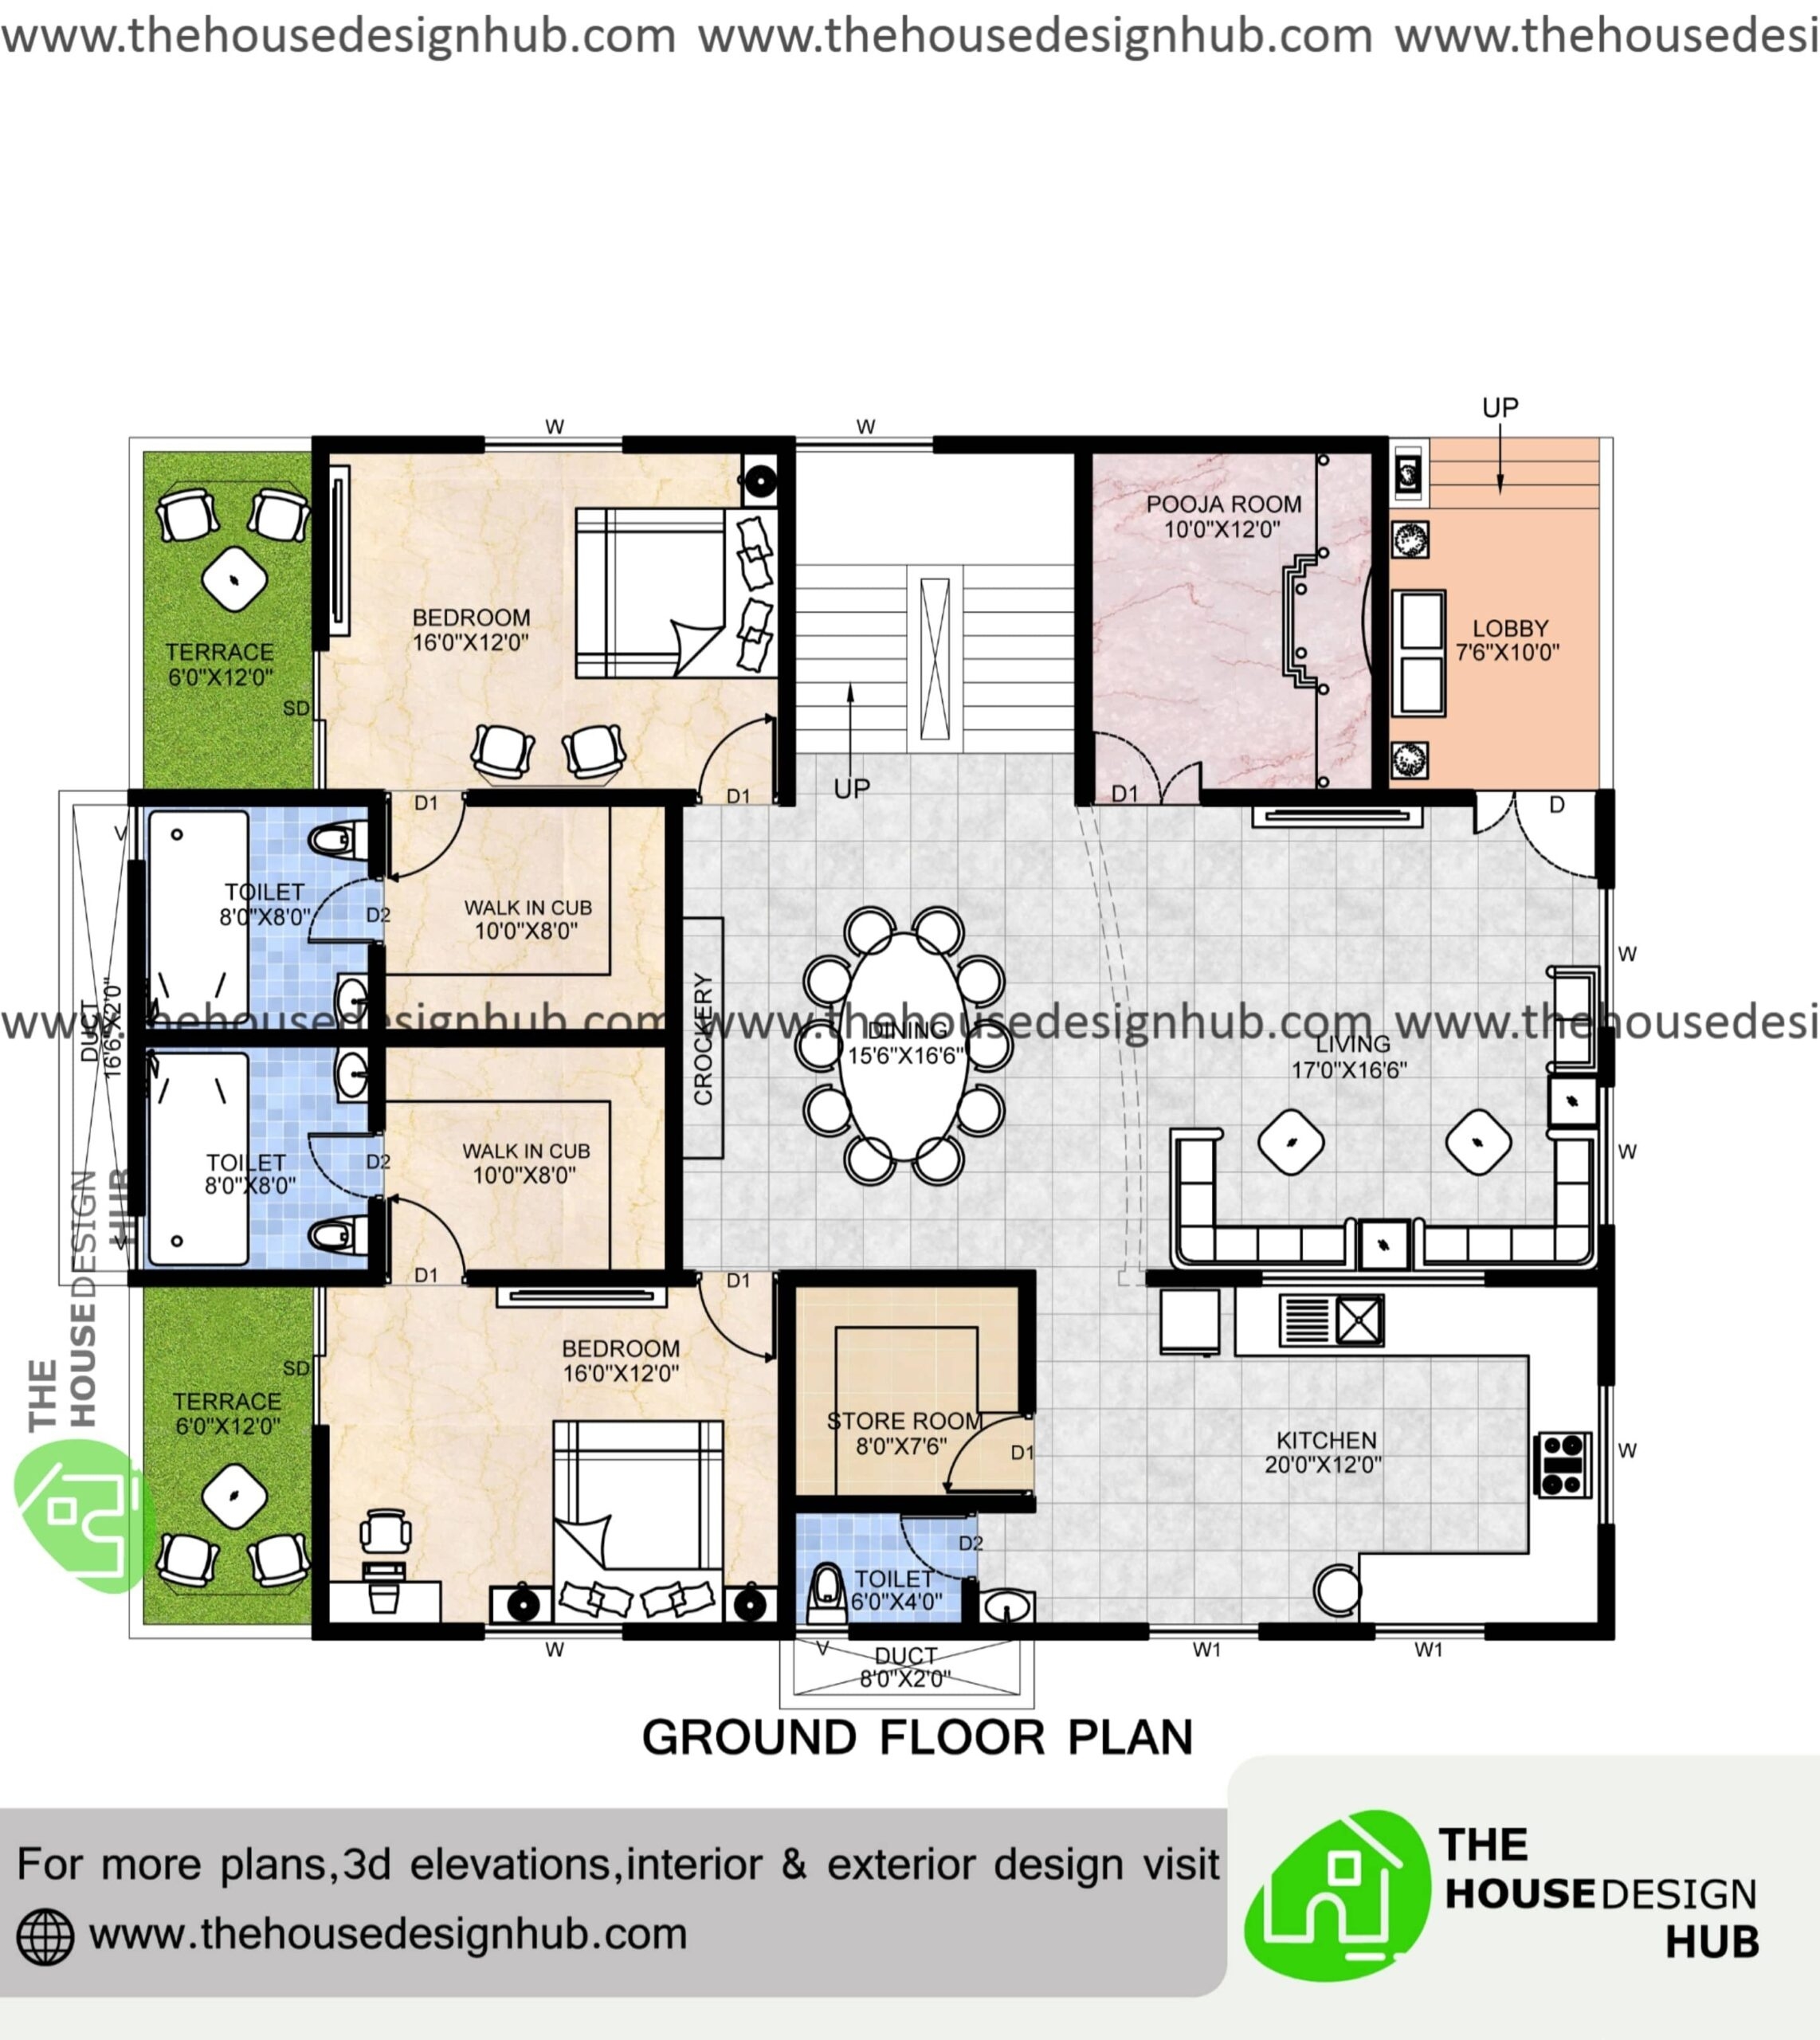 Fascinating 52 x 42 ft 2 bedroom house plans in indian style under 2300 sq ft | the for cool 1200 sq ft indian house plans